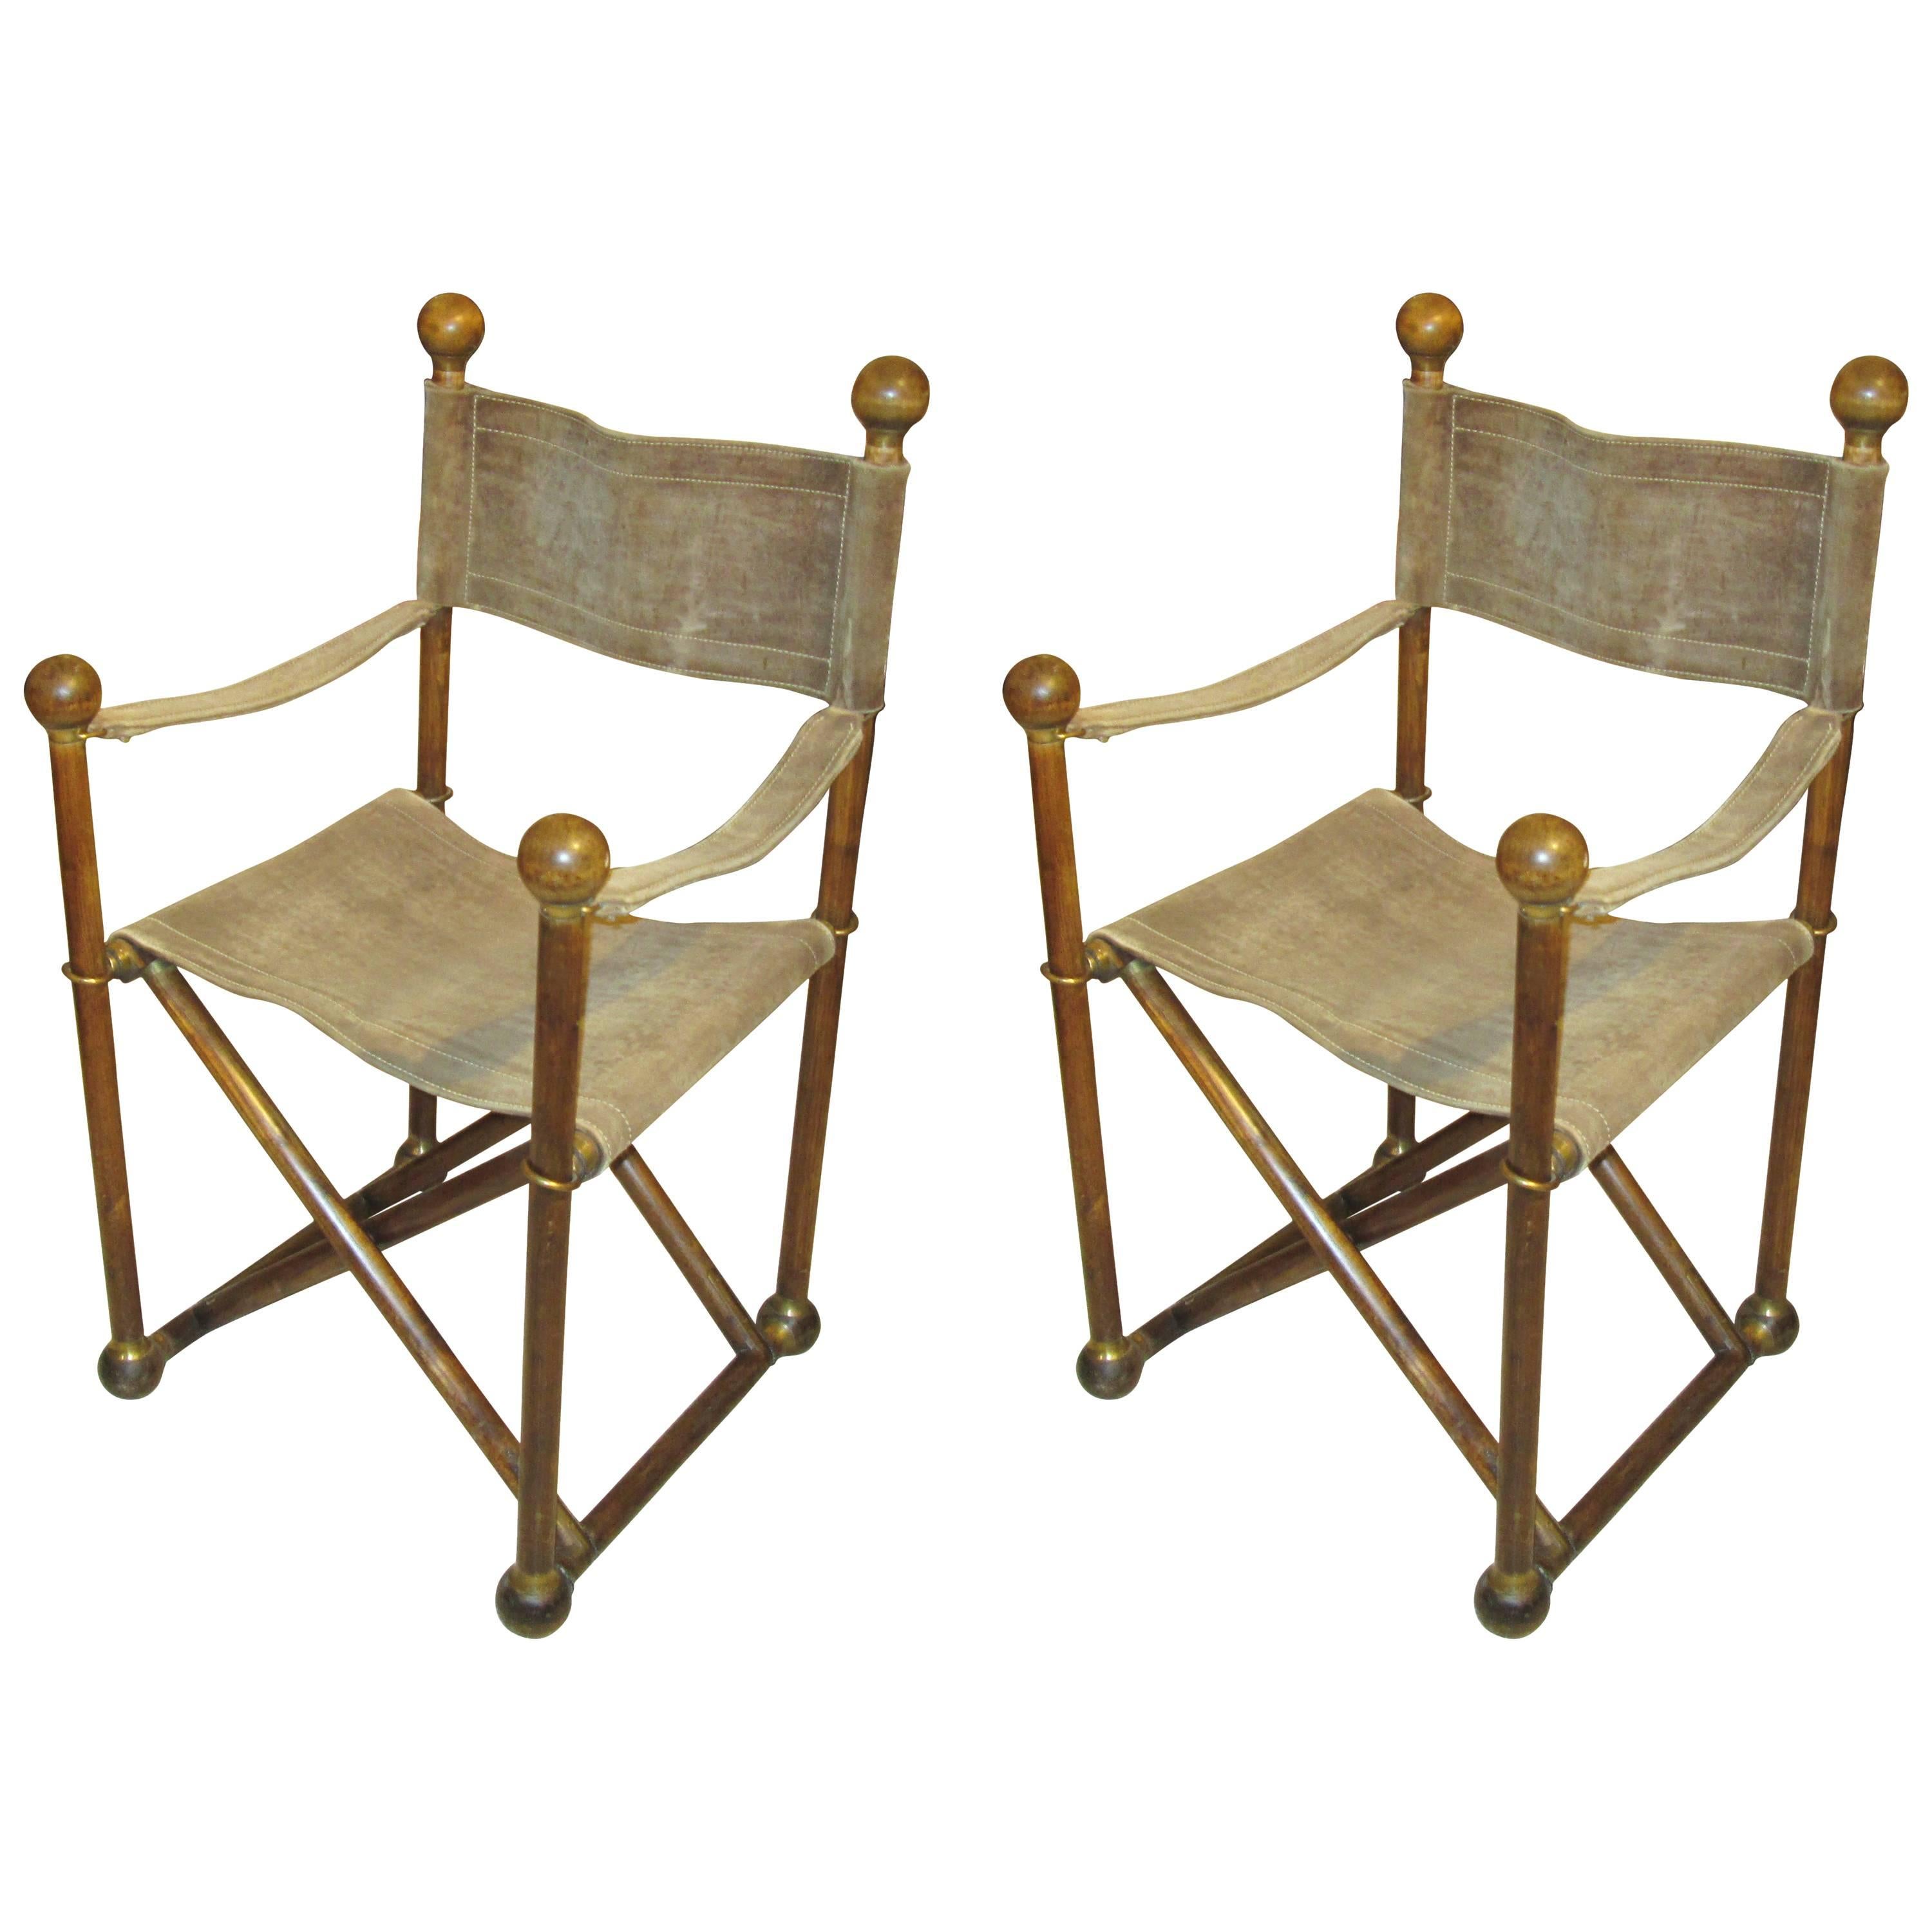 Pair of Hand-Stitched Director's Chairs with Brass Hardware